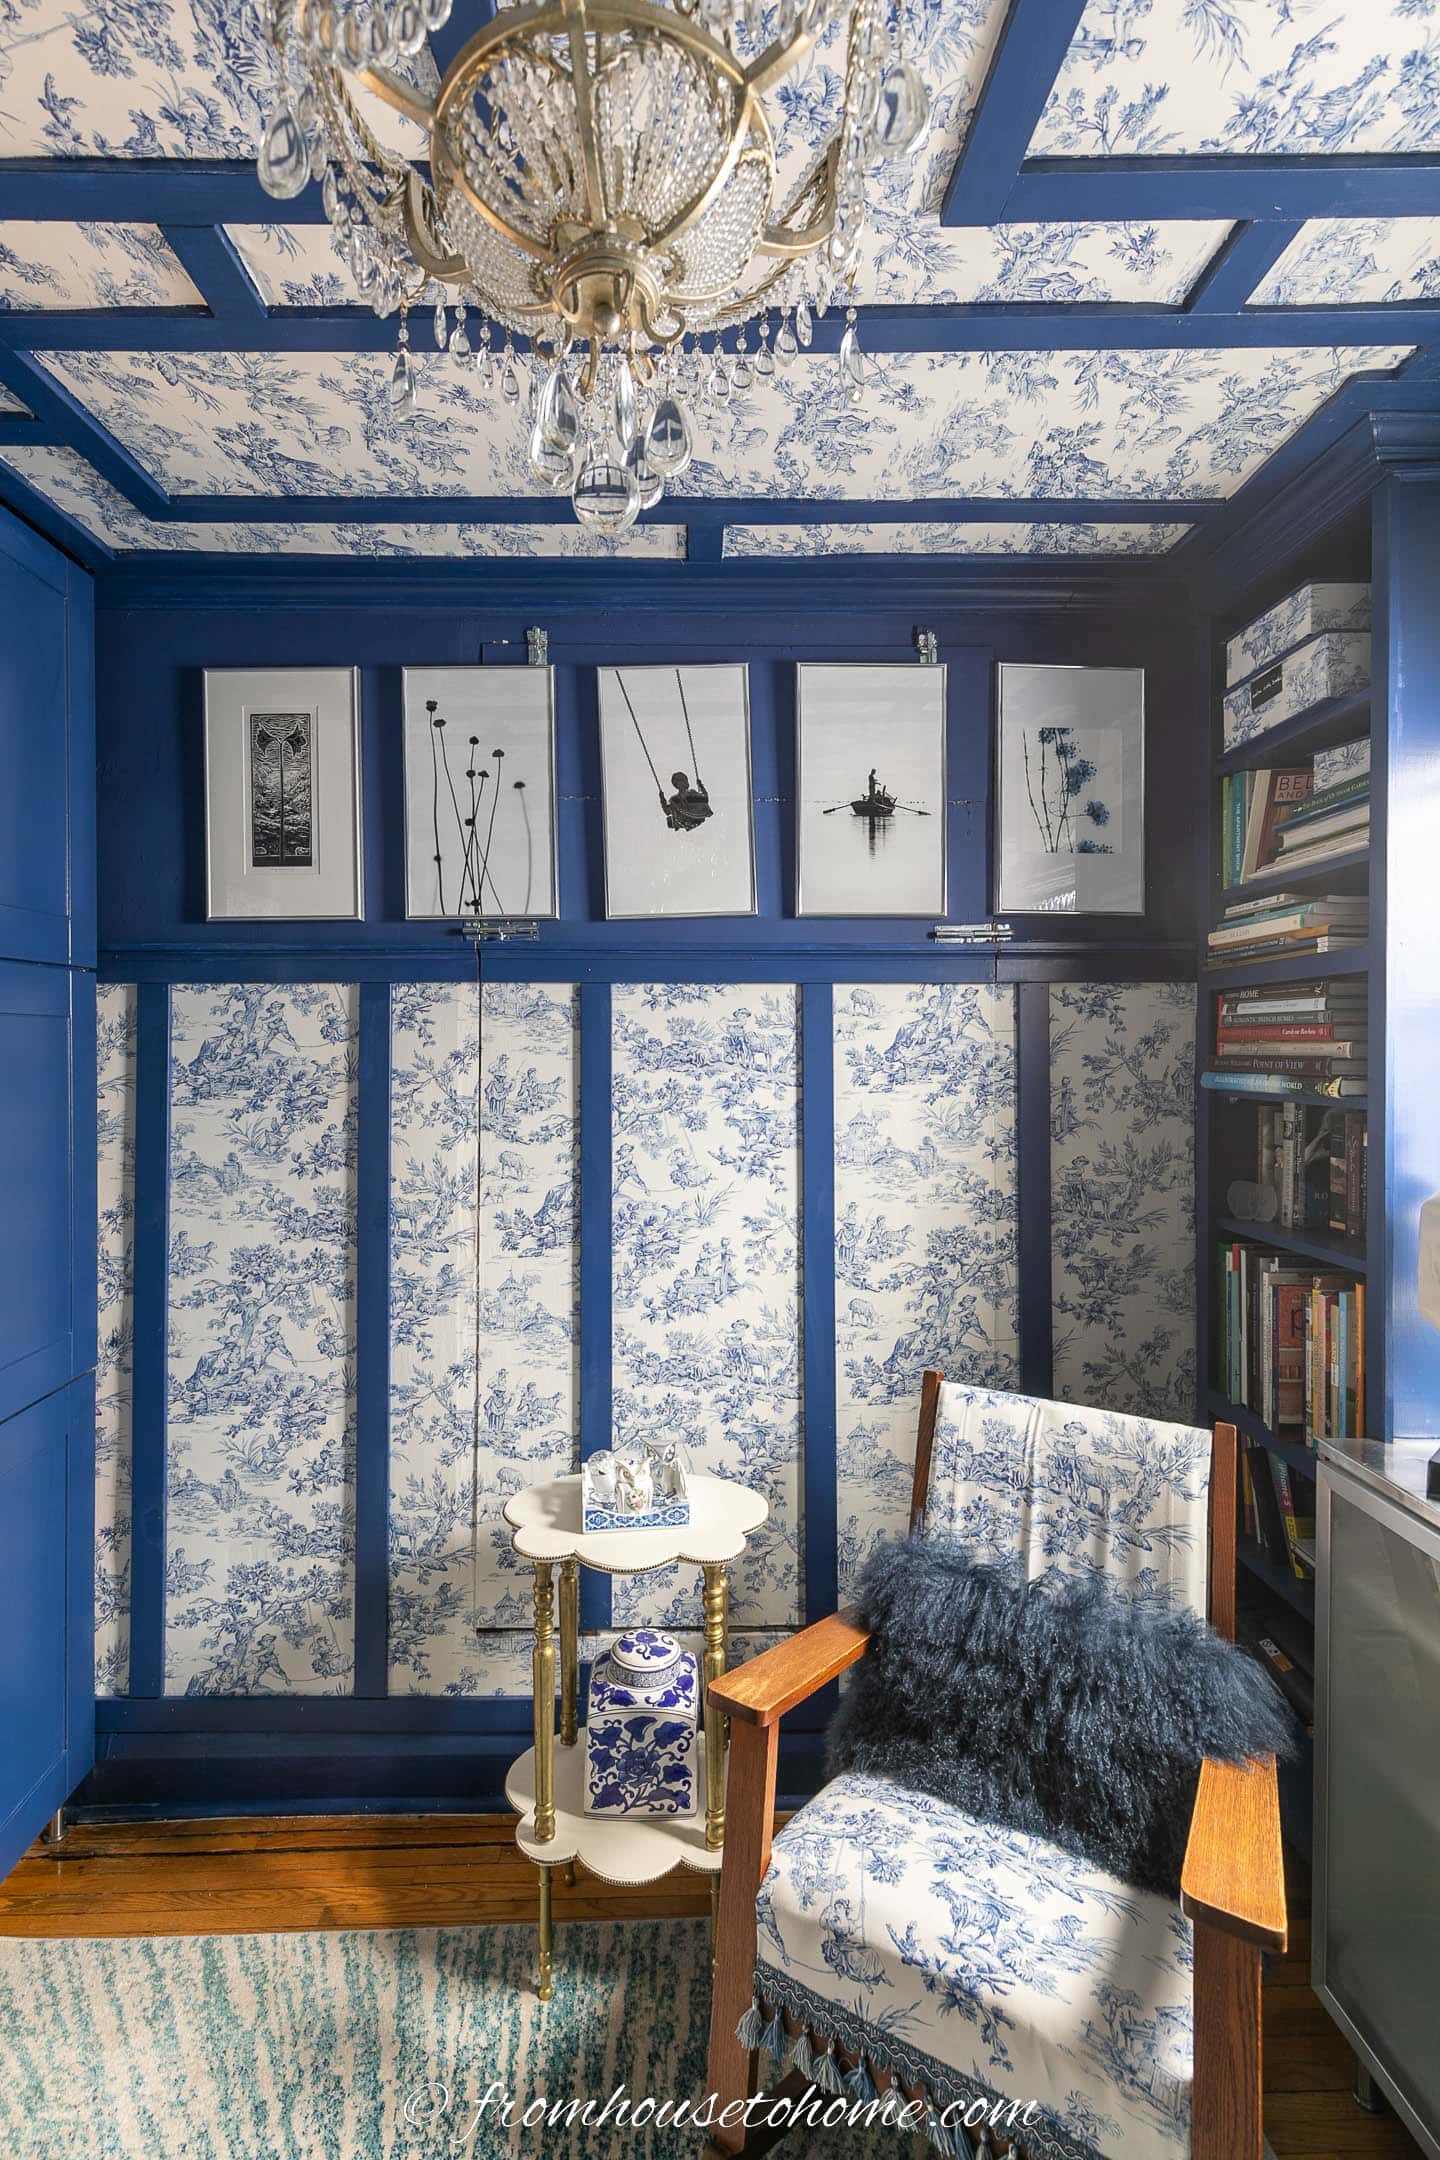 A sitting area in a small home office decorated with blue and white toile